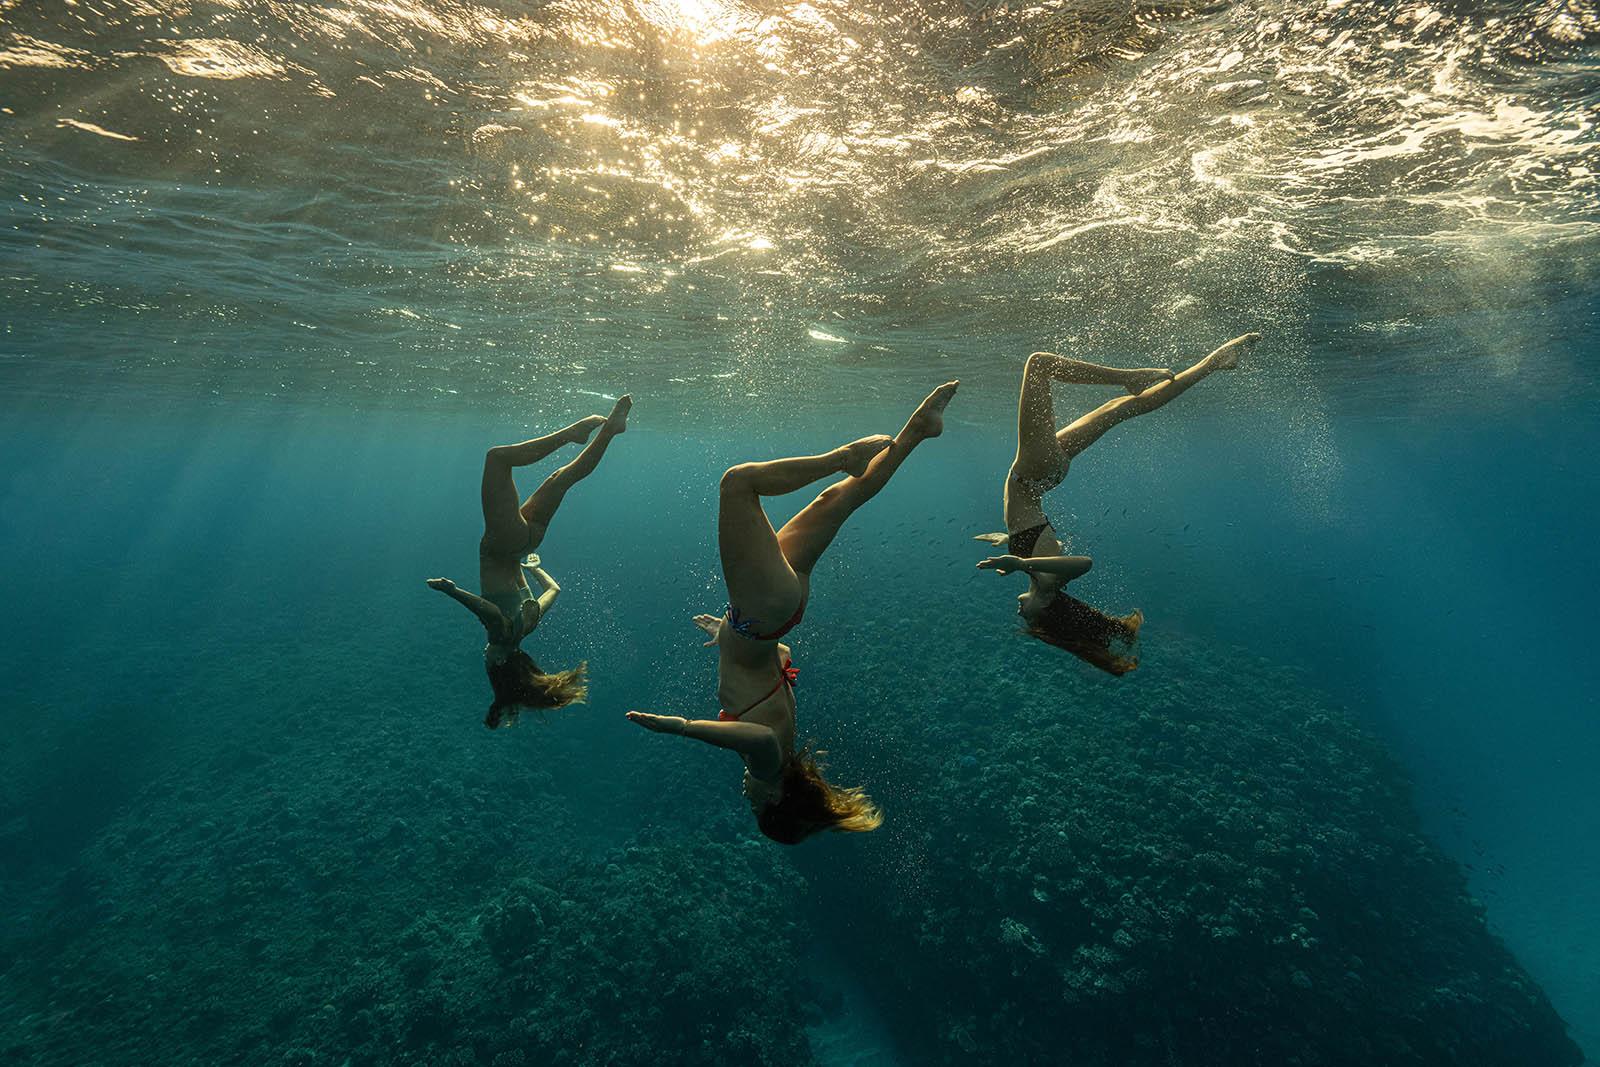 Synchronised swimming in the Blue - Fine art print, Color underwater photography